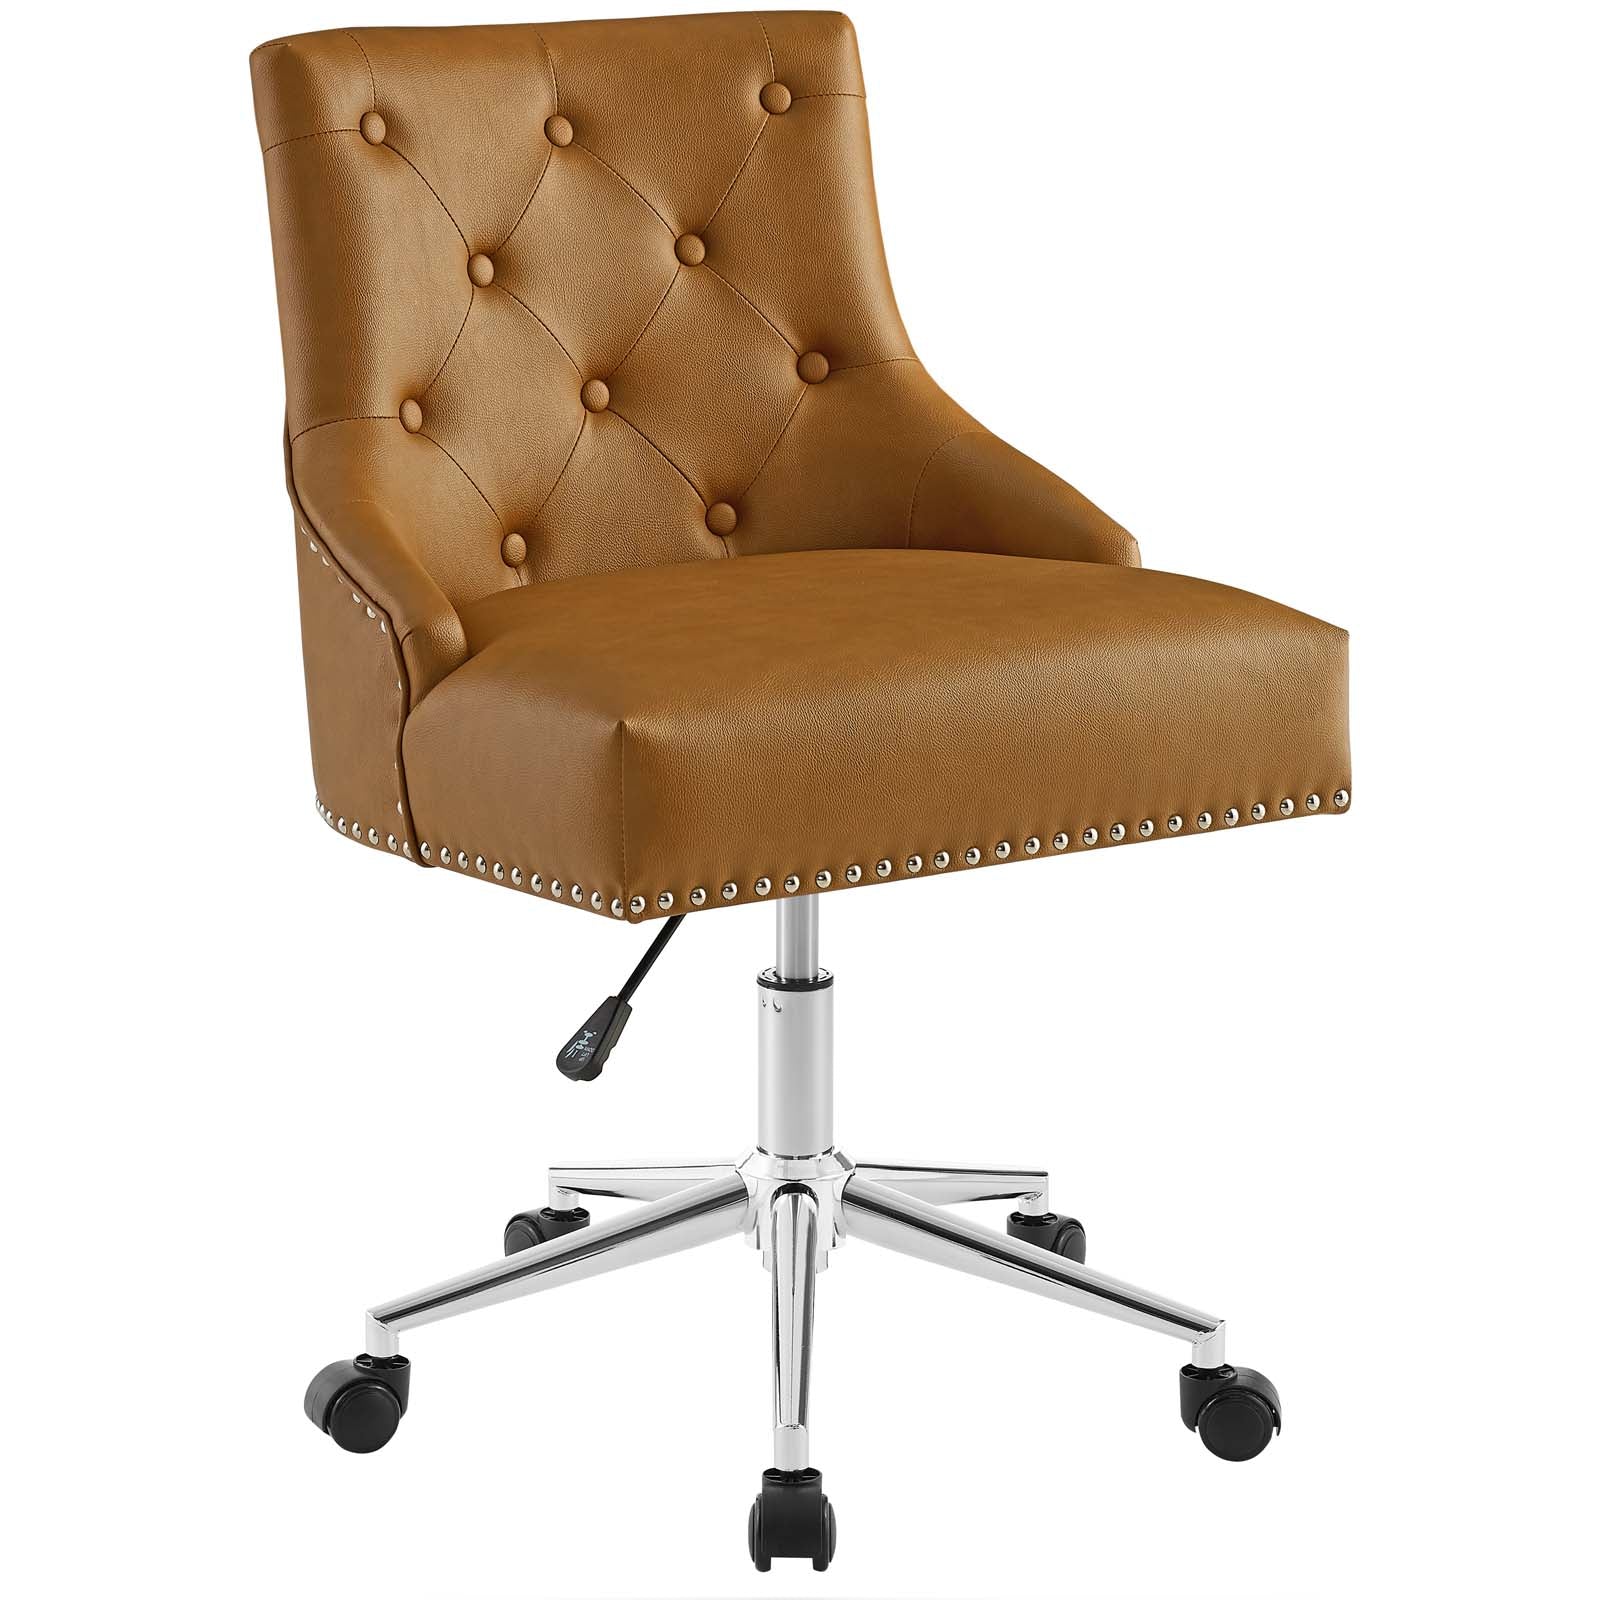 Tan Regent Tufted Button Swivel Faux Leather Office Chair